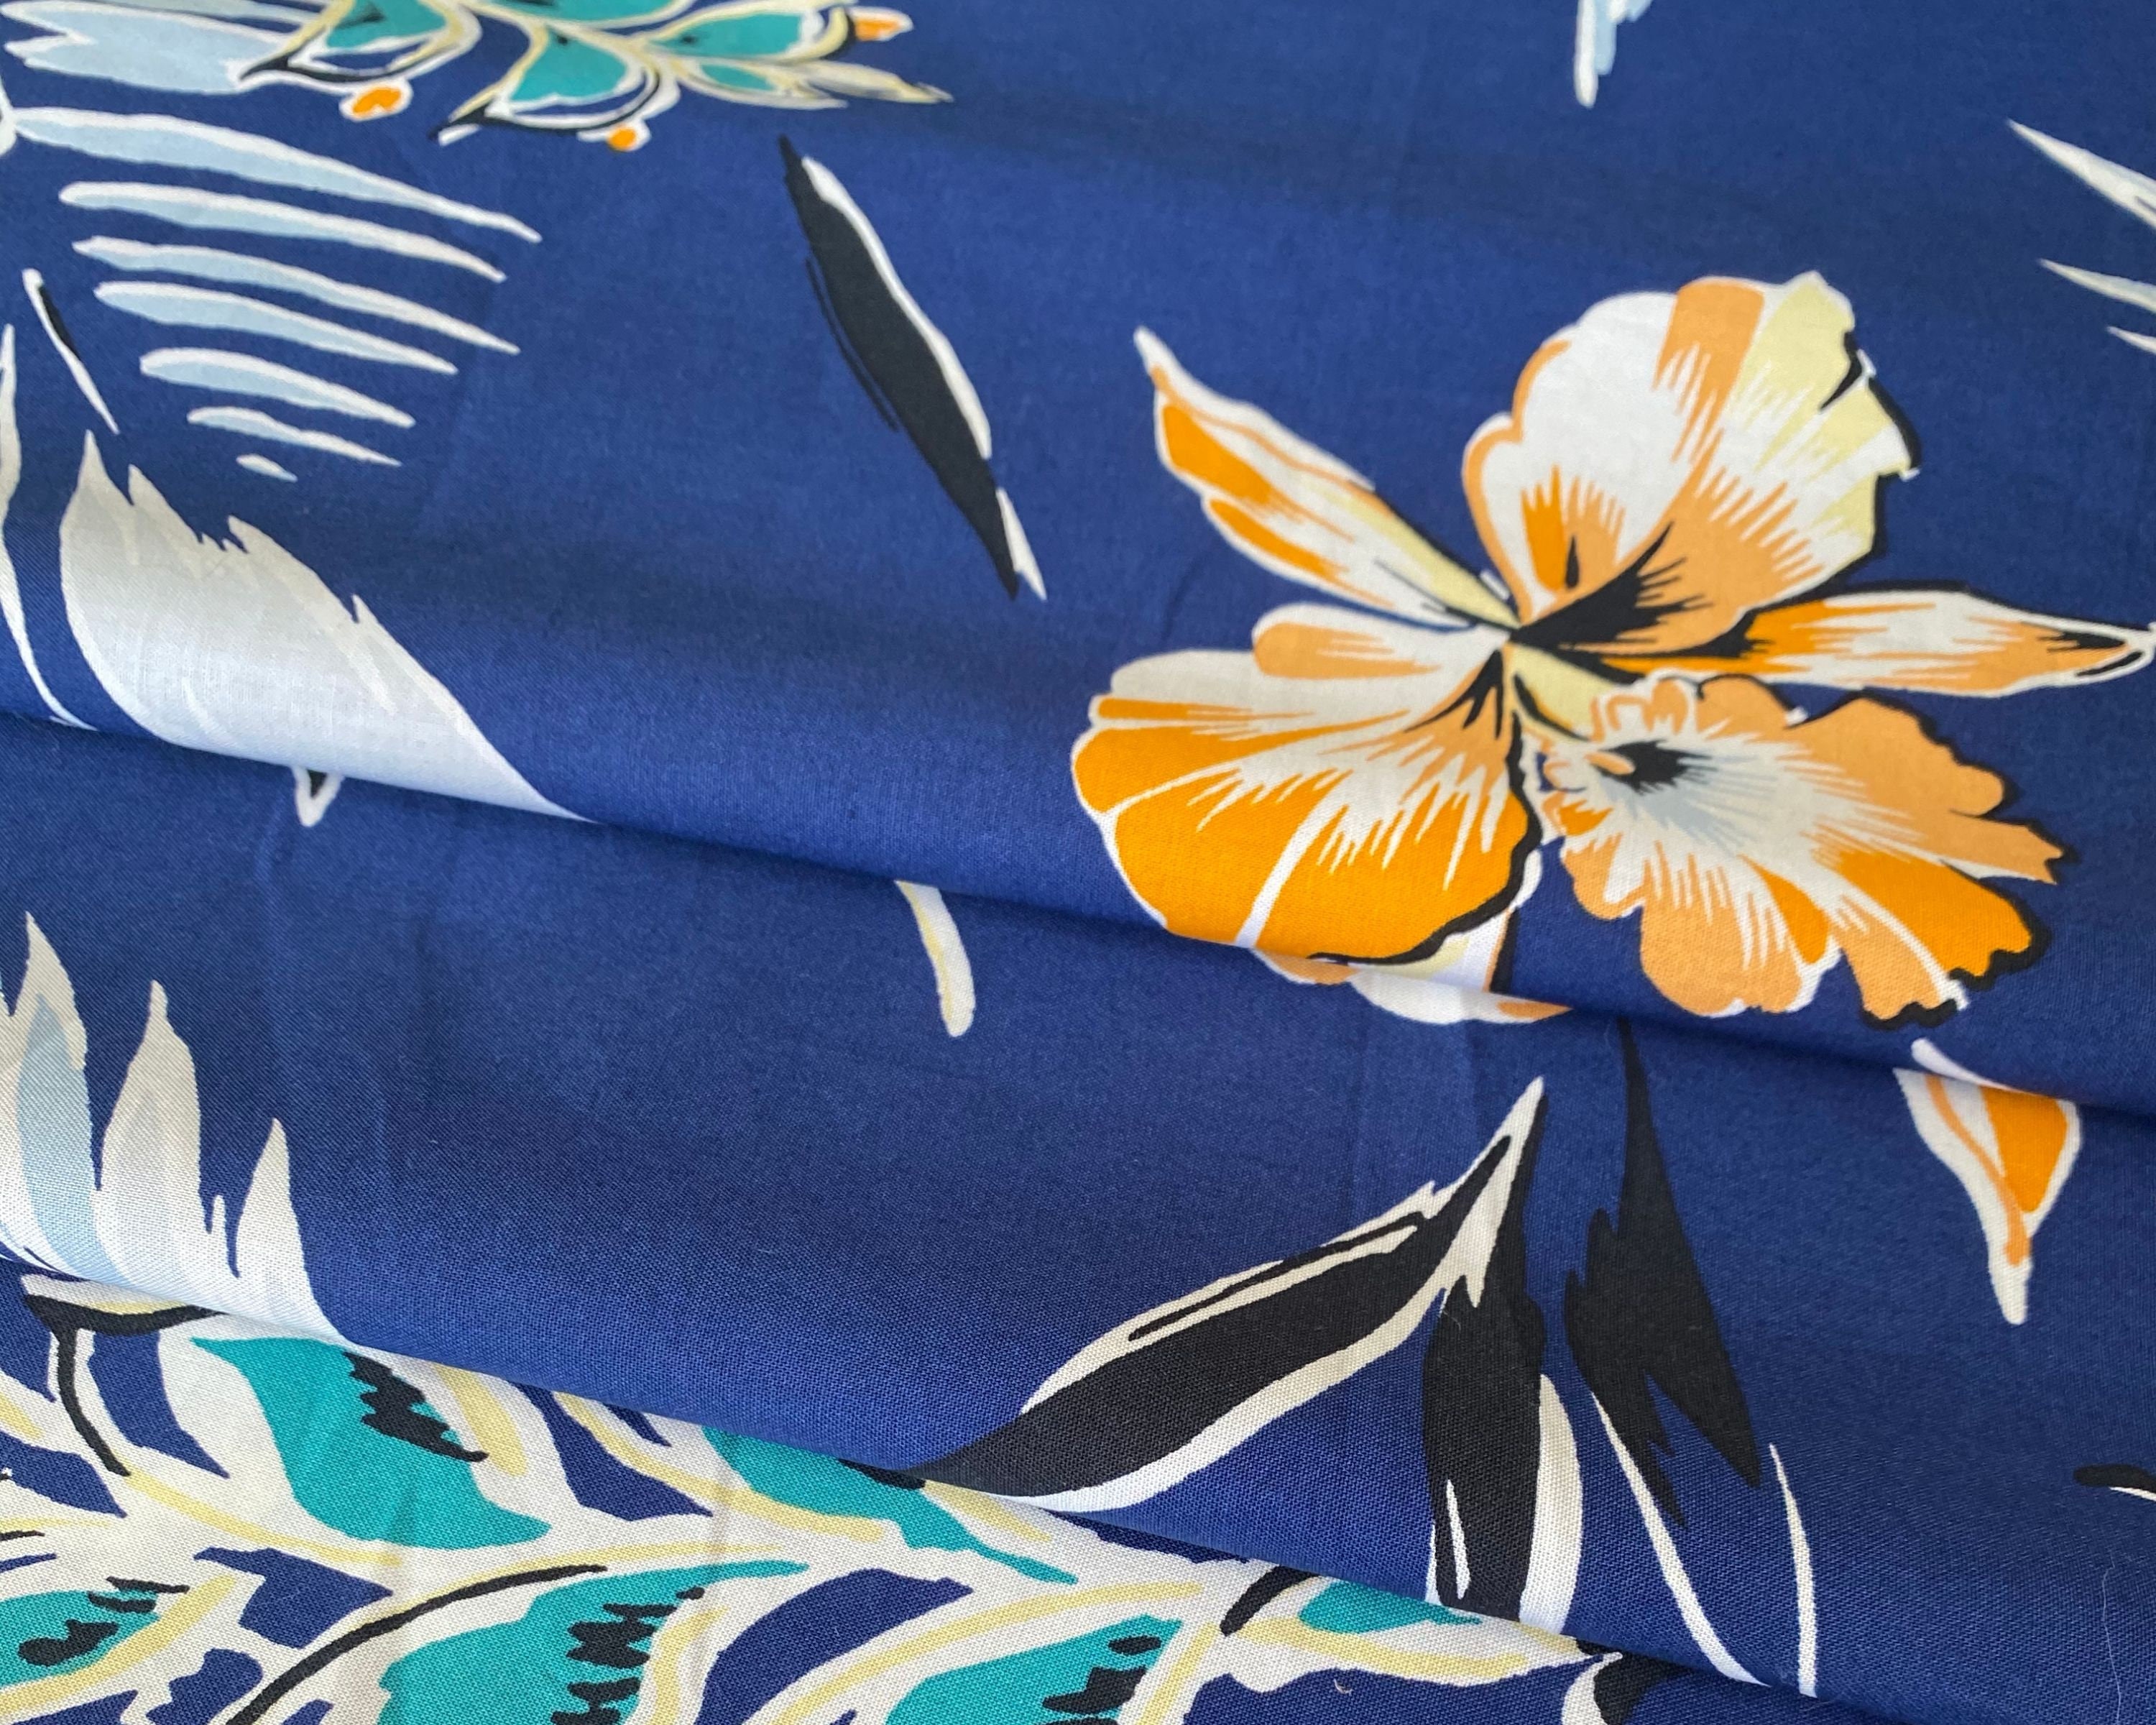 Floral Print Cotton Fabric Blue Color Cotton Material for - Etsy UK